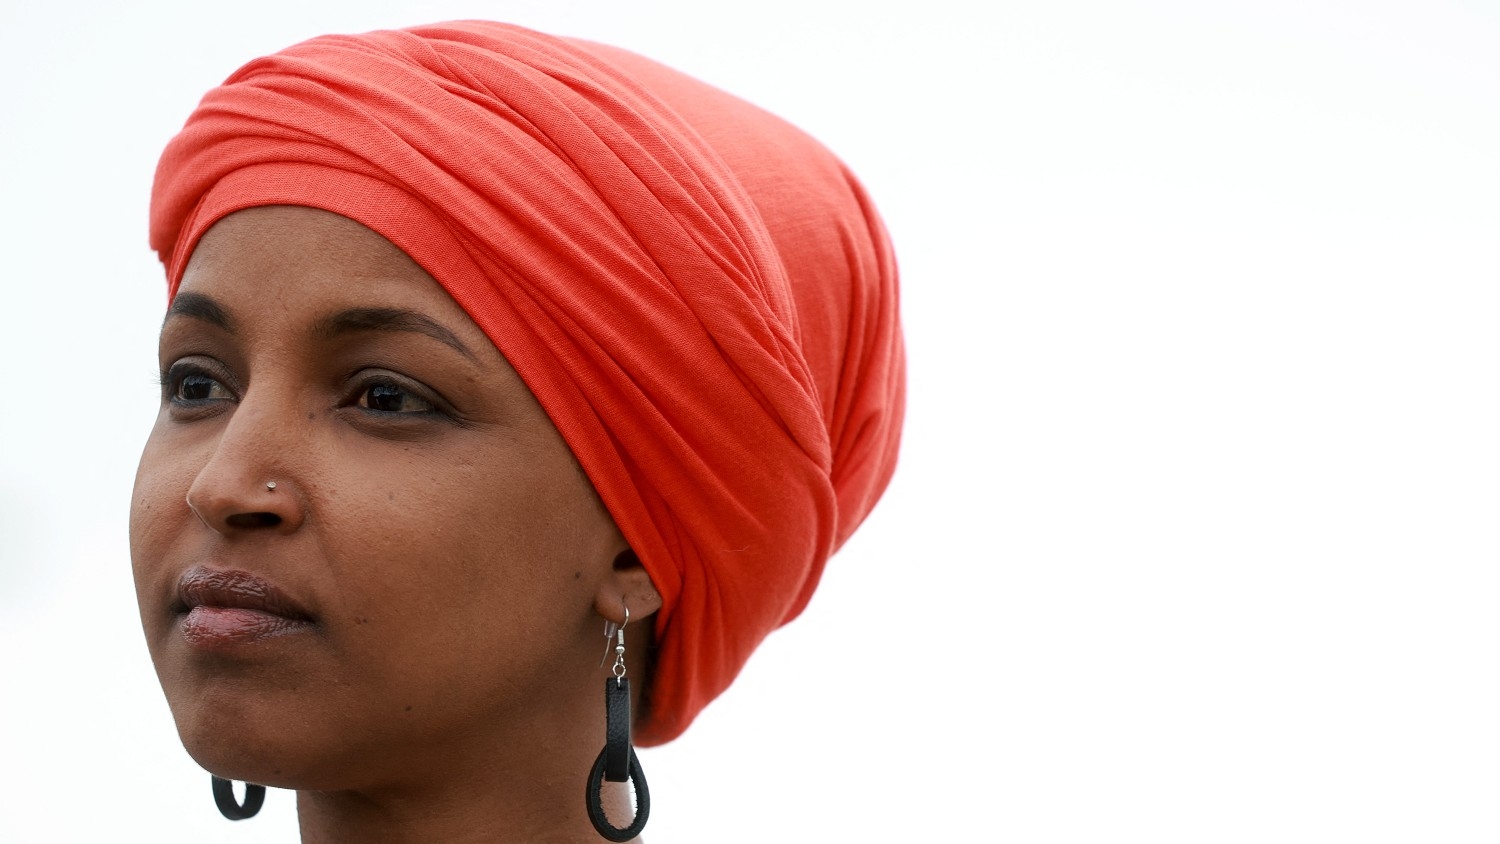 Since being elected to office in 2018, Ilhan Omar has received strong condemnations from Republicans and Democrats alike for her criticism of Israel.